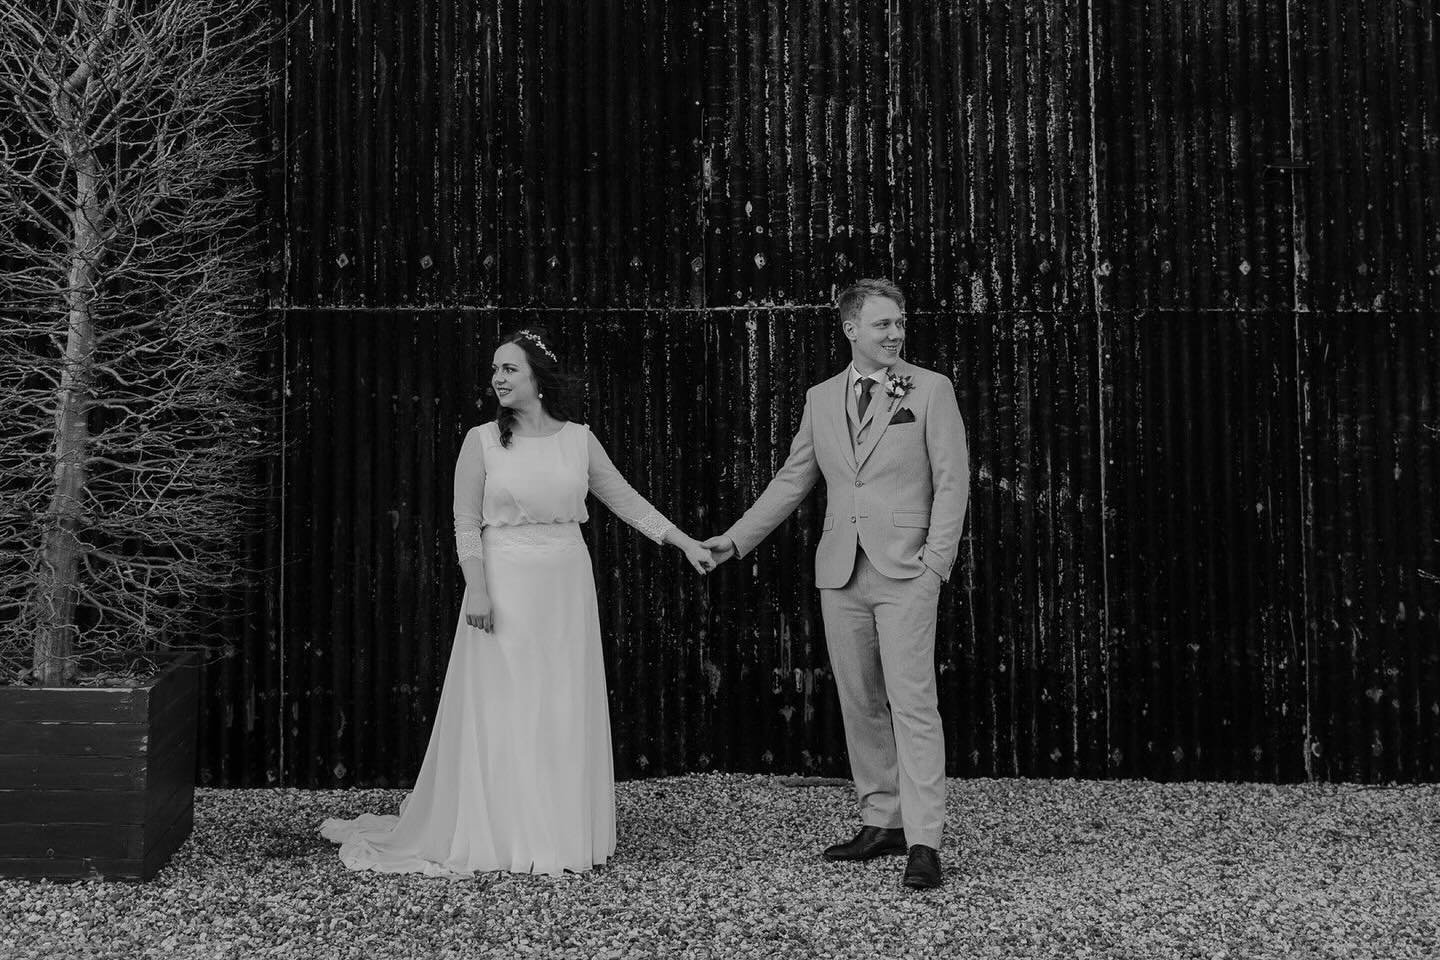 When close friends tie the knot 🪢 and you get to capture it all. What a day 🥹

J &amp; L 🤍🌿

Venue: @crippsbarn 
Flowers: @go_wild_flowers 
Video: @helenamidgleyfilms 
MUA: @emilytarrantmakeup 
Hair: @fordhamhairdesign 

.
#somersetweddingphotogr